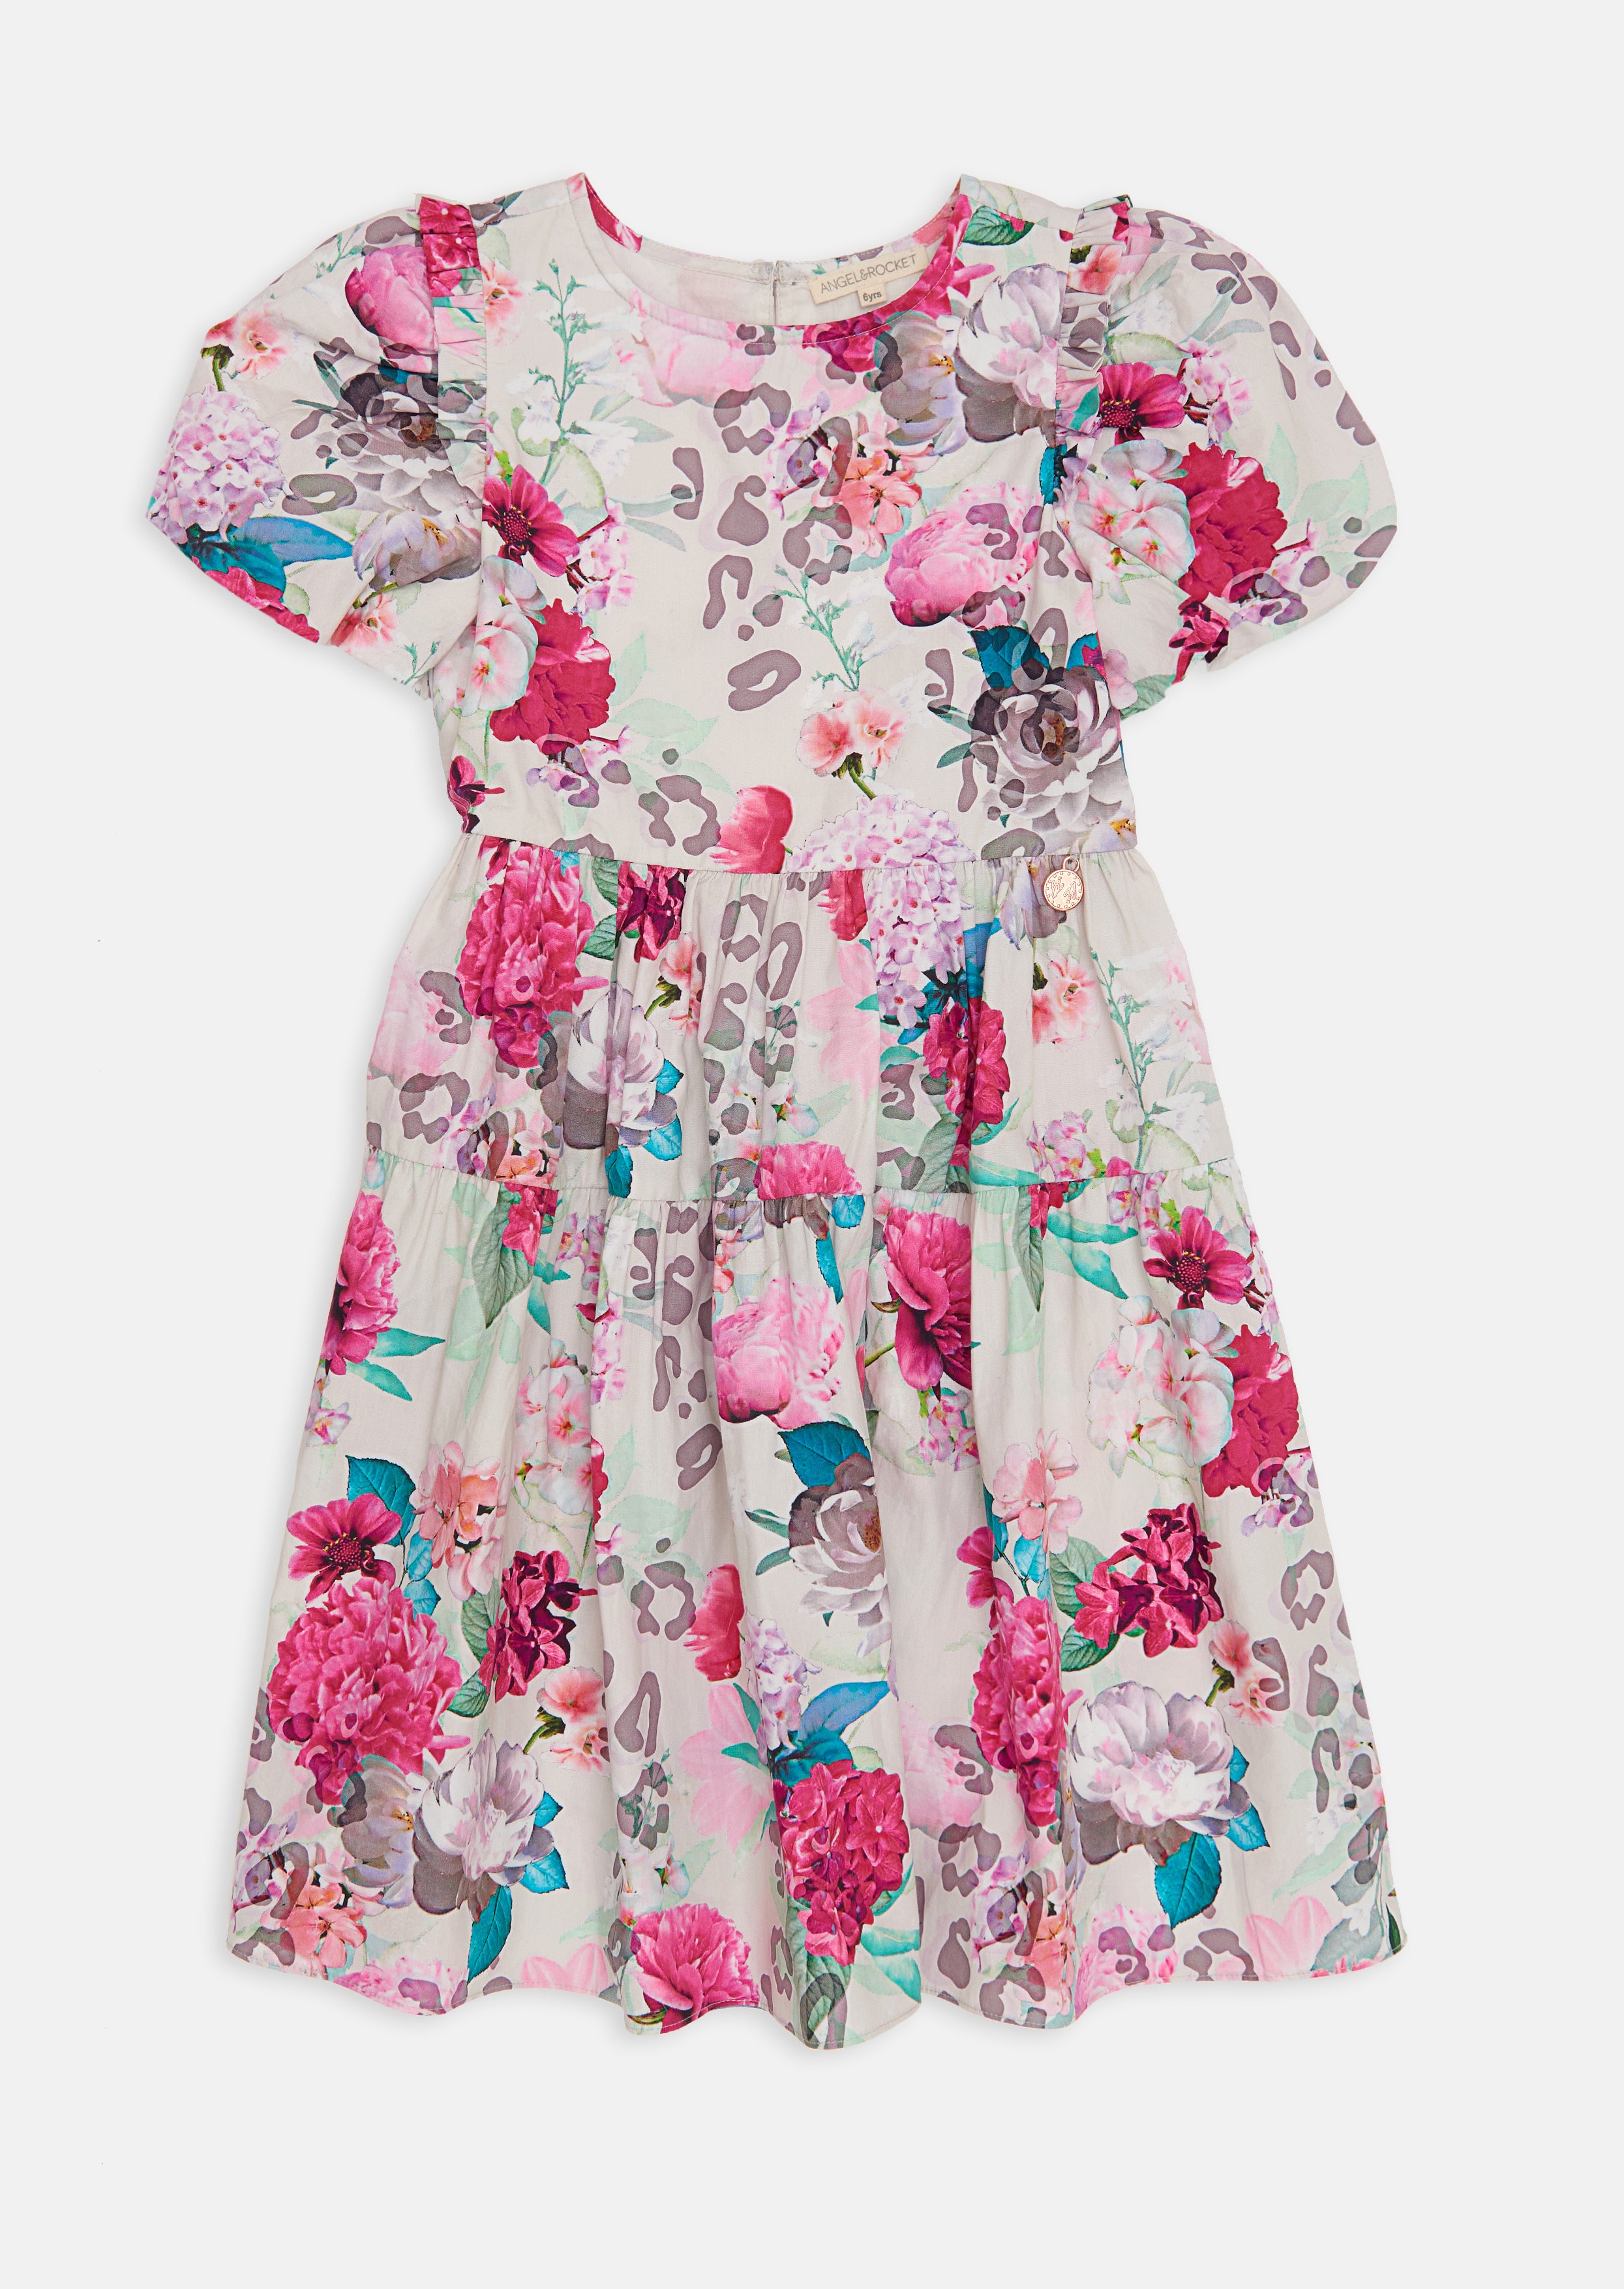 Girls Puff Sleeves with Floral Printed Pink Dress